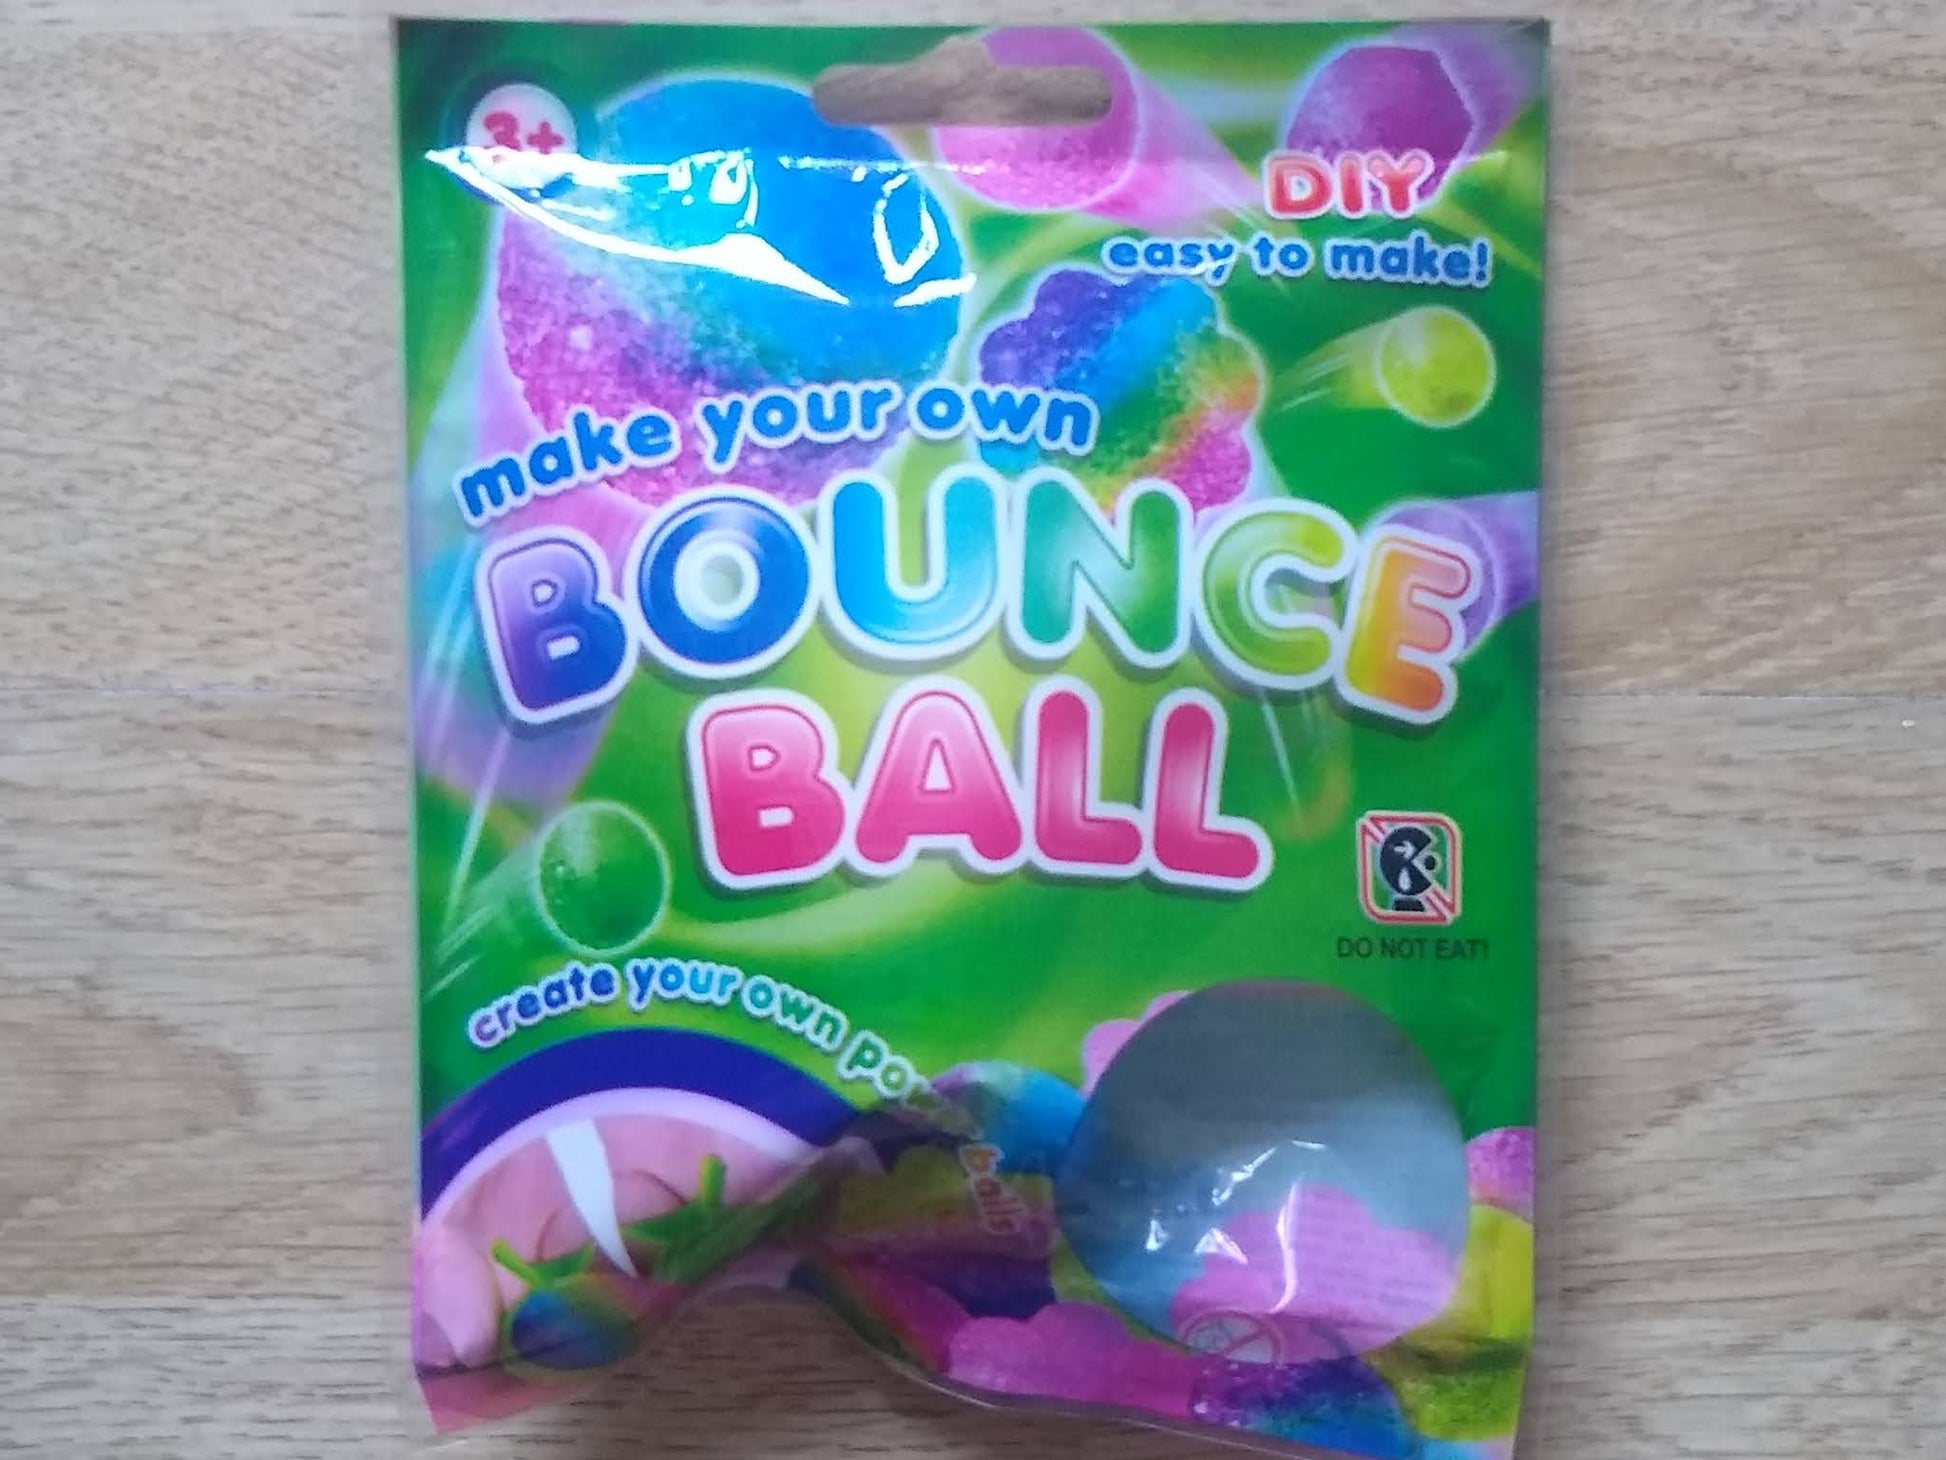 Make your own bounce ball - product